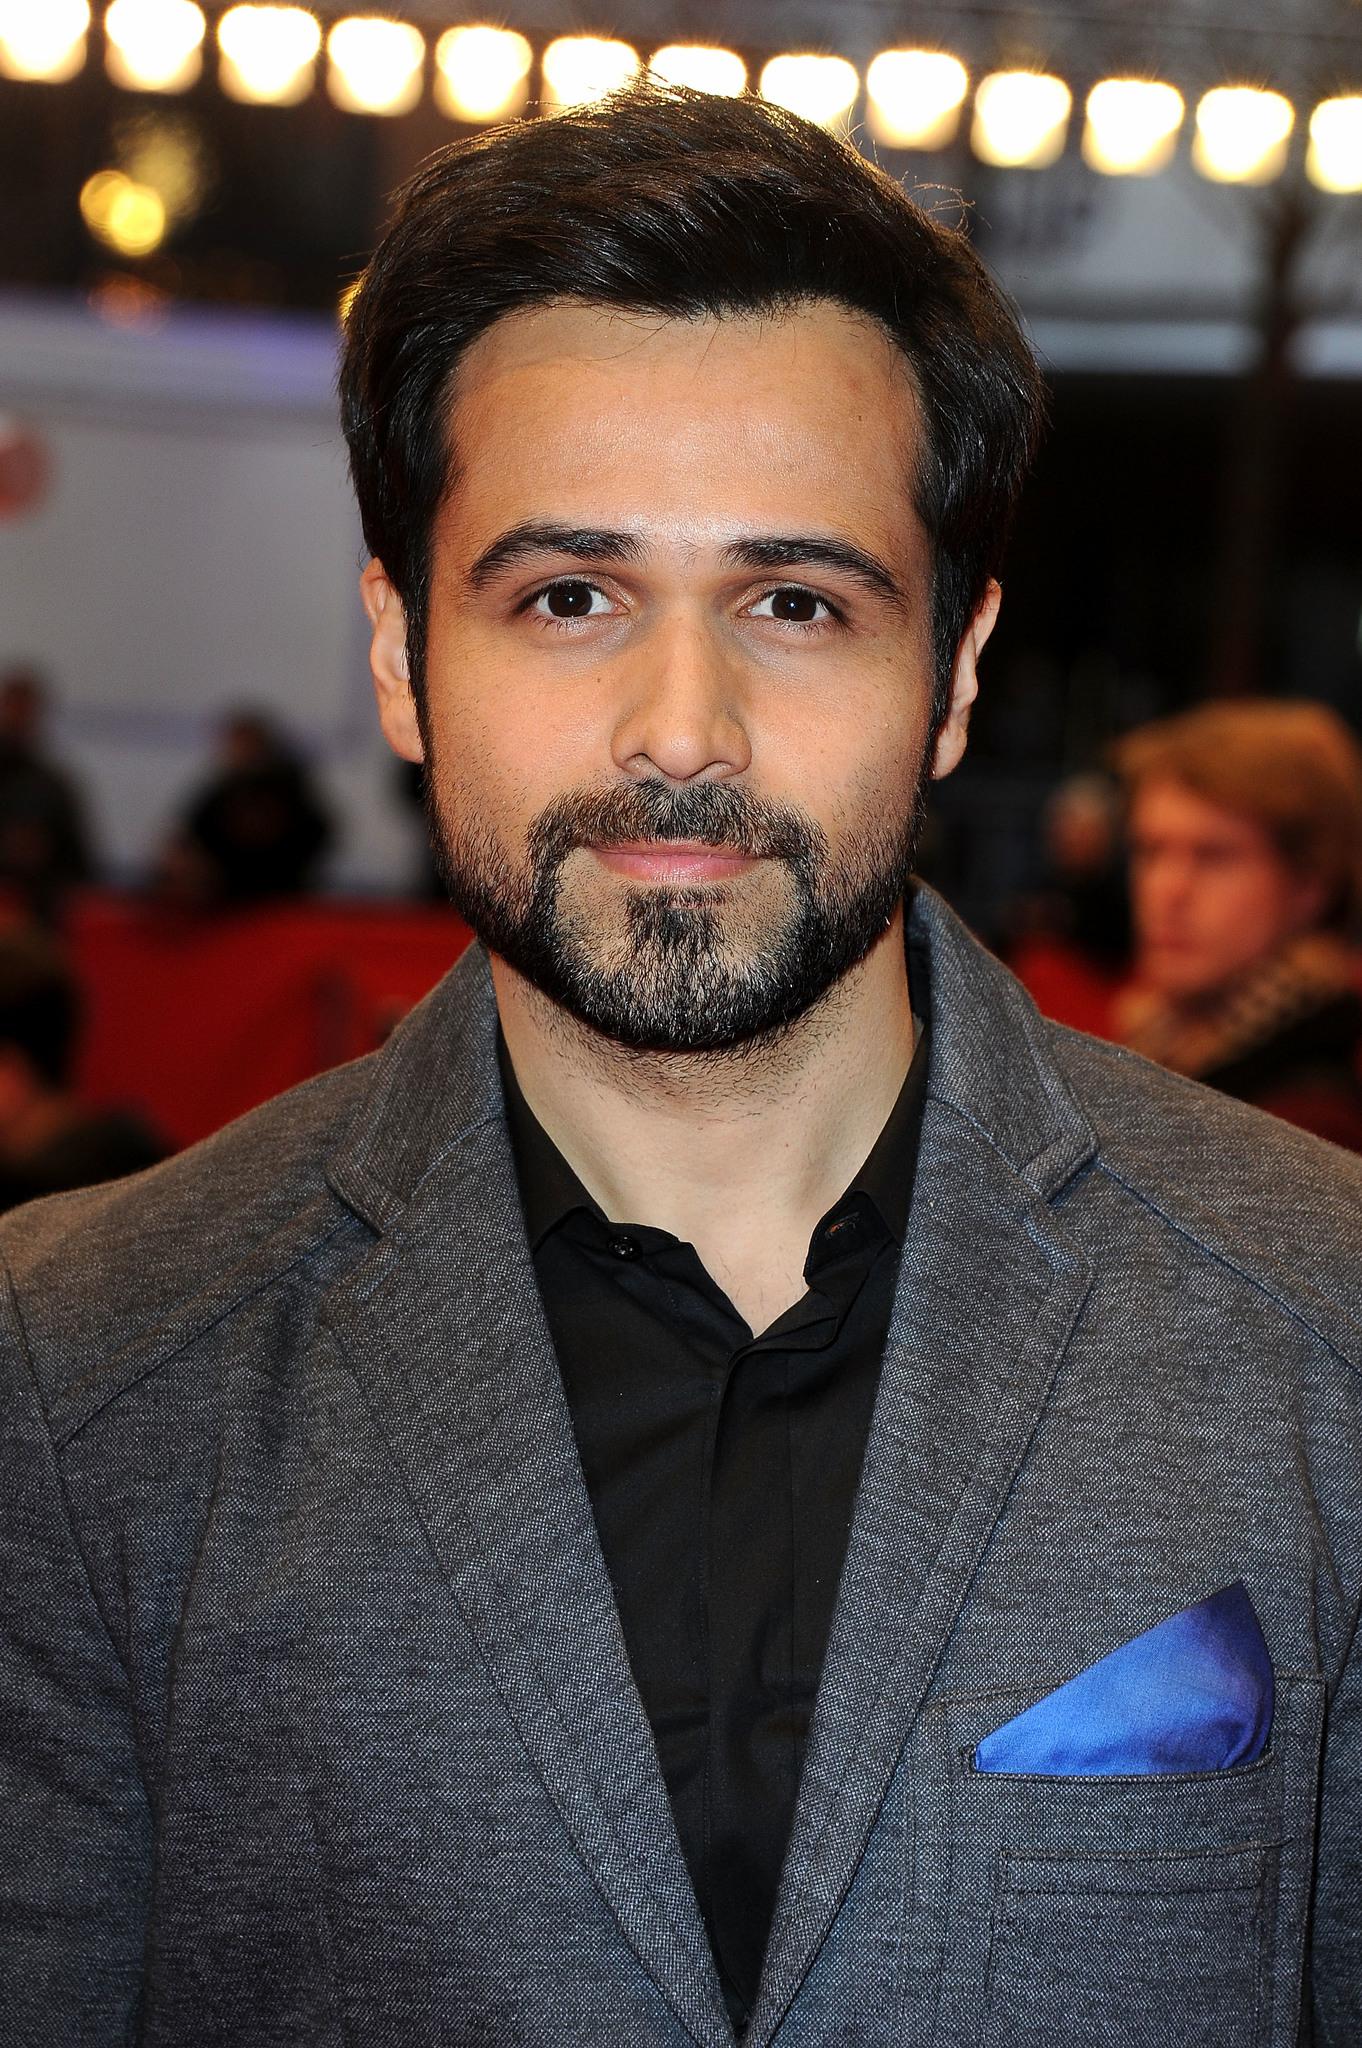 Emraan Hashmi, another successful actor associated with the Bhatt family, has made a mark in Bollywood with roles in musical hits and unconventional characters. He established himself with films like 